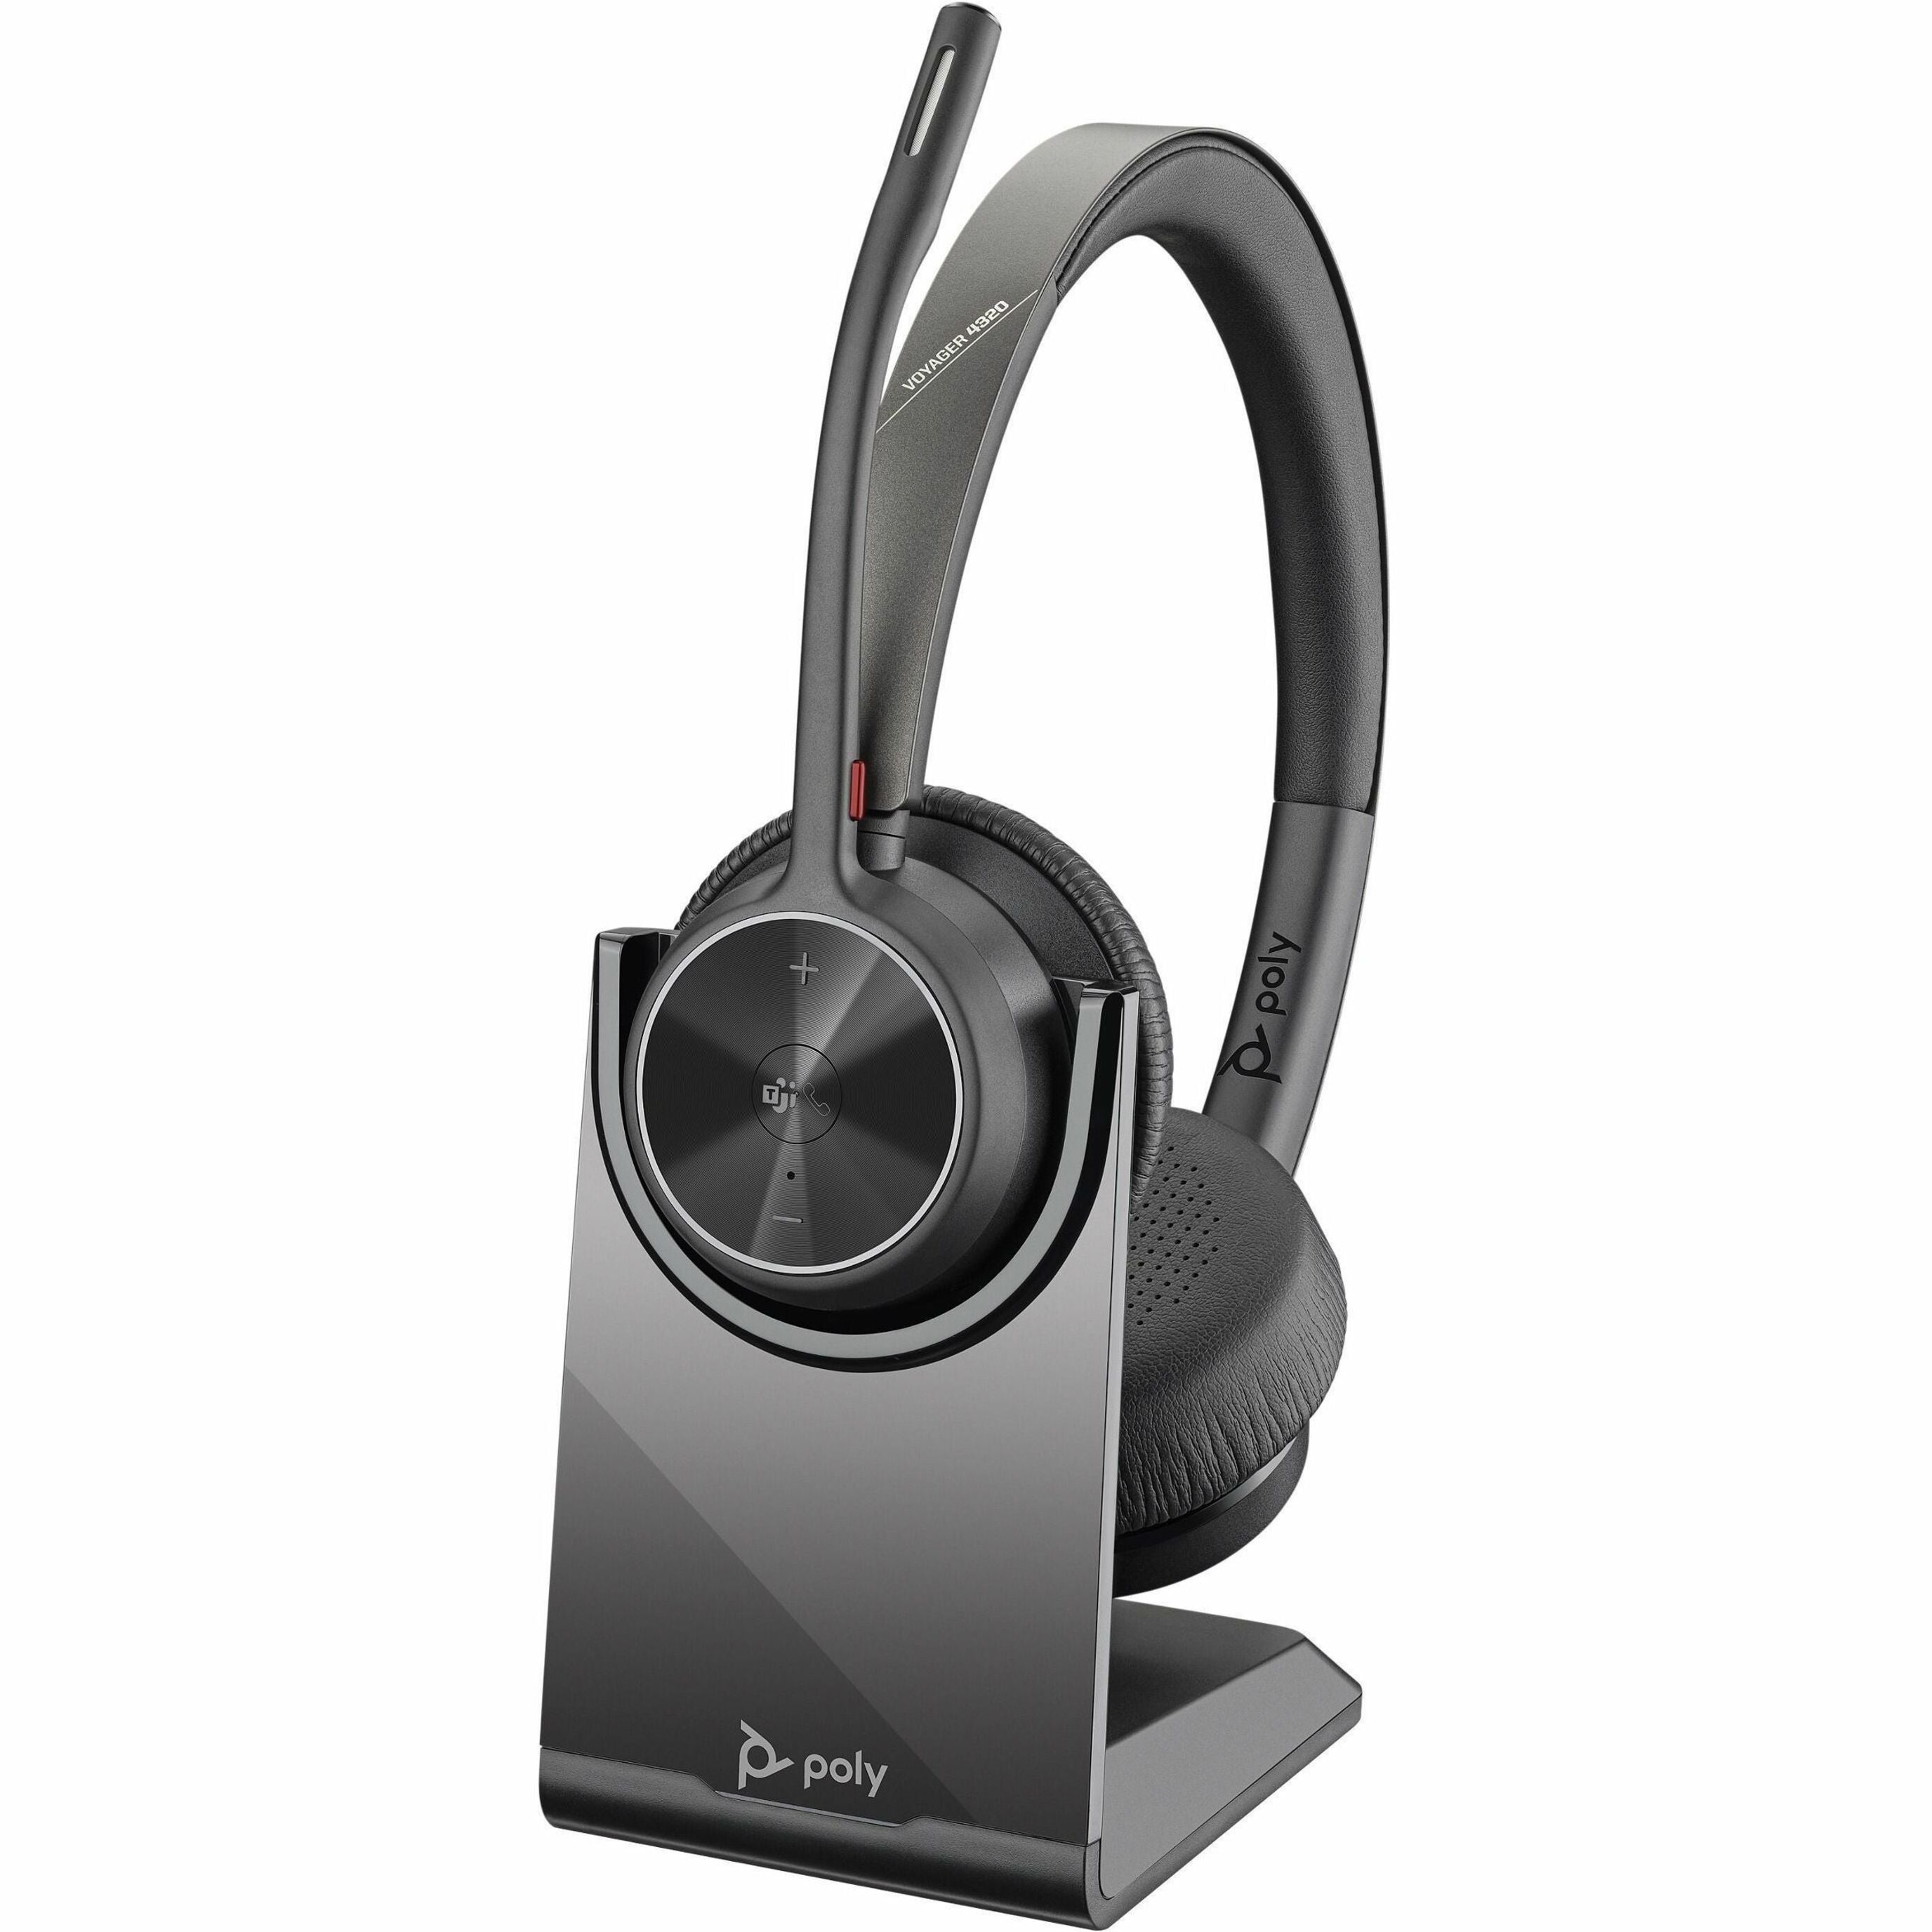 Poly 218479-02 Voyager 4300 UC 4320-M Headset, Wireless Bluetooth Stereo Headset with Noise Cancelling Microphone